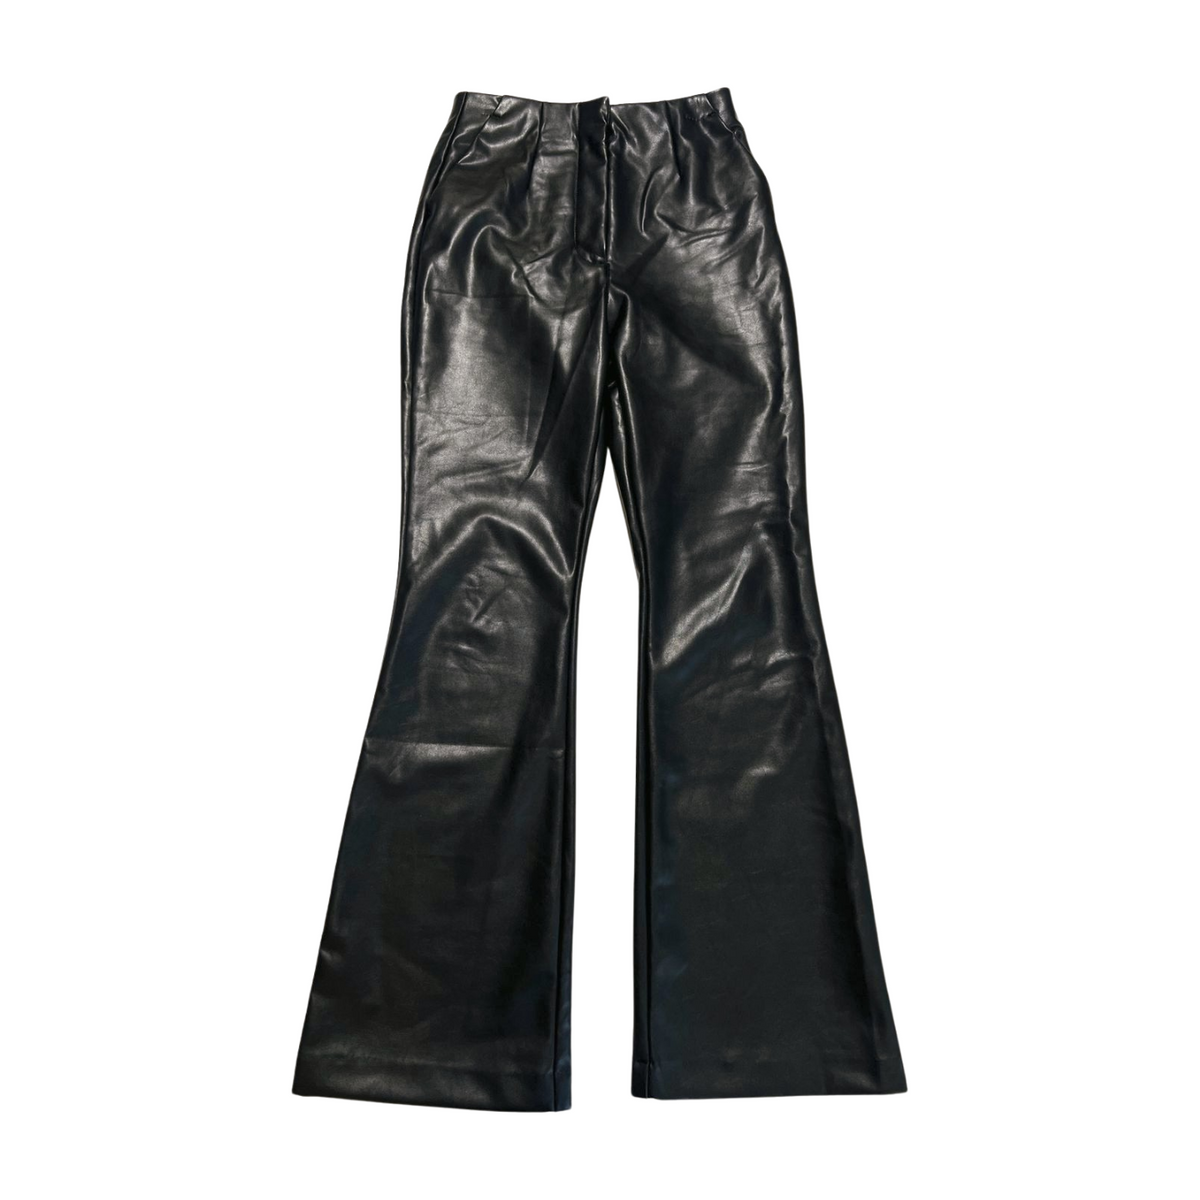 Abercrombie & Fitch- Vegan Leather Flare Pants